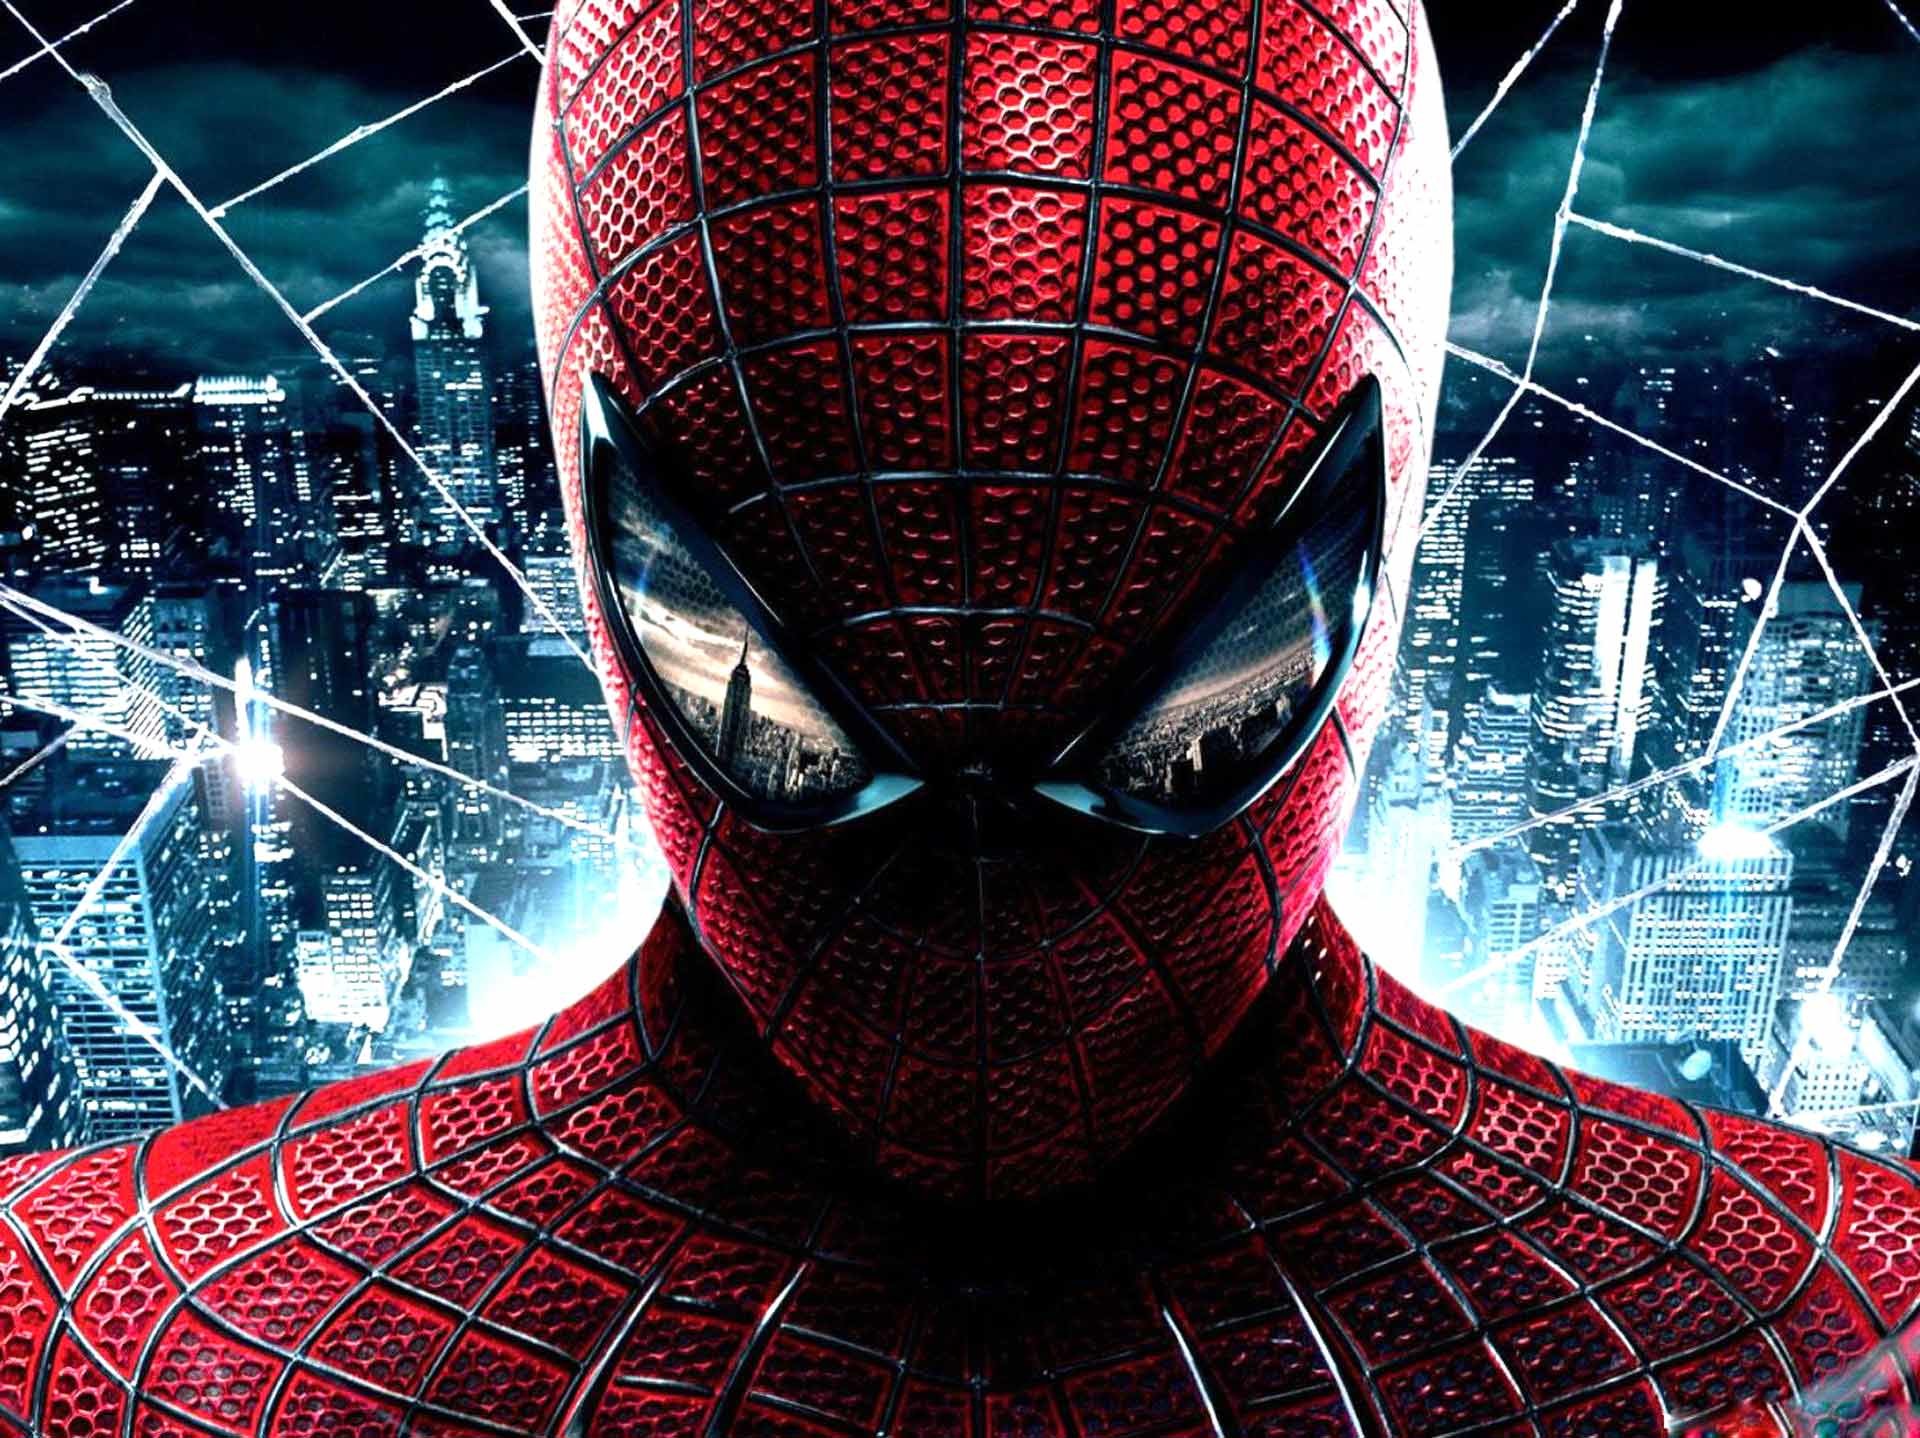 The Amazing Spider Man 2 HD Wallpapers & Desktop Backgrounds | The .